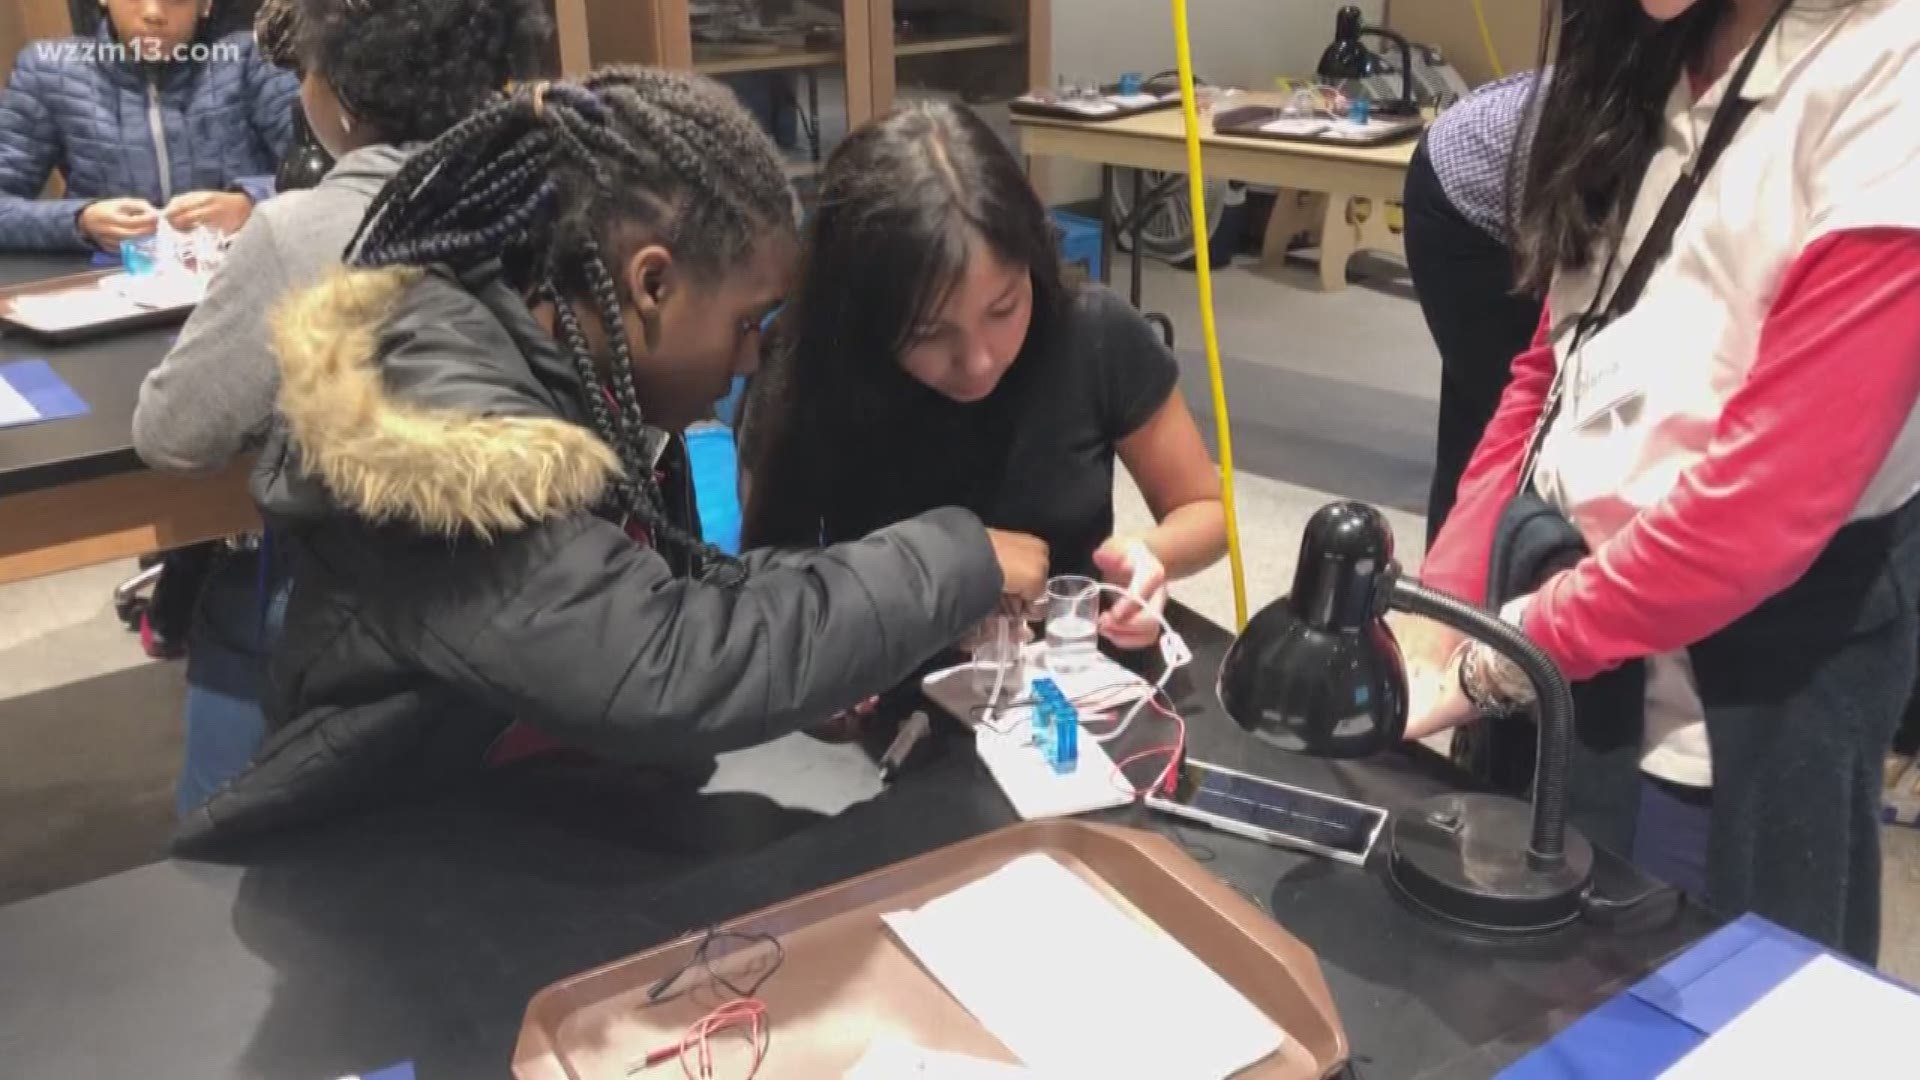 Grand Rapids Public Museum and the DTE Energy Foundation find a creative way to get girls interested in science